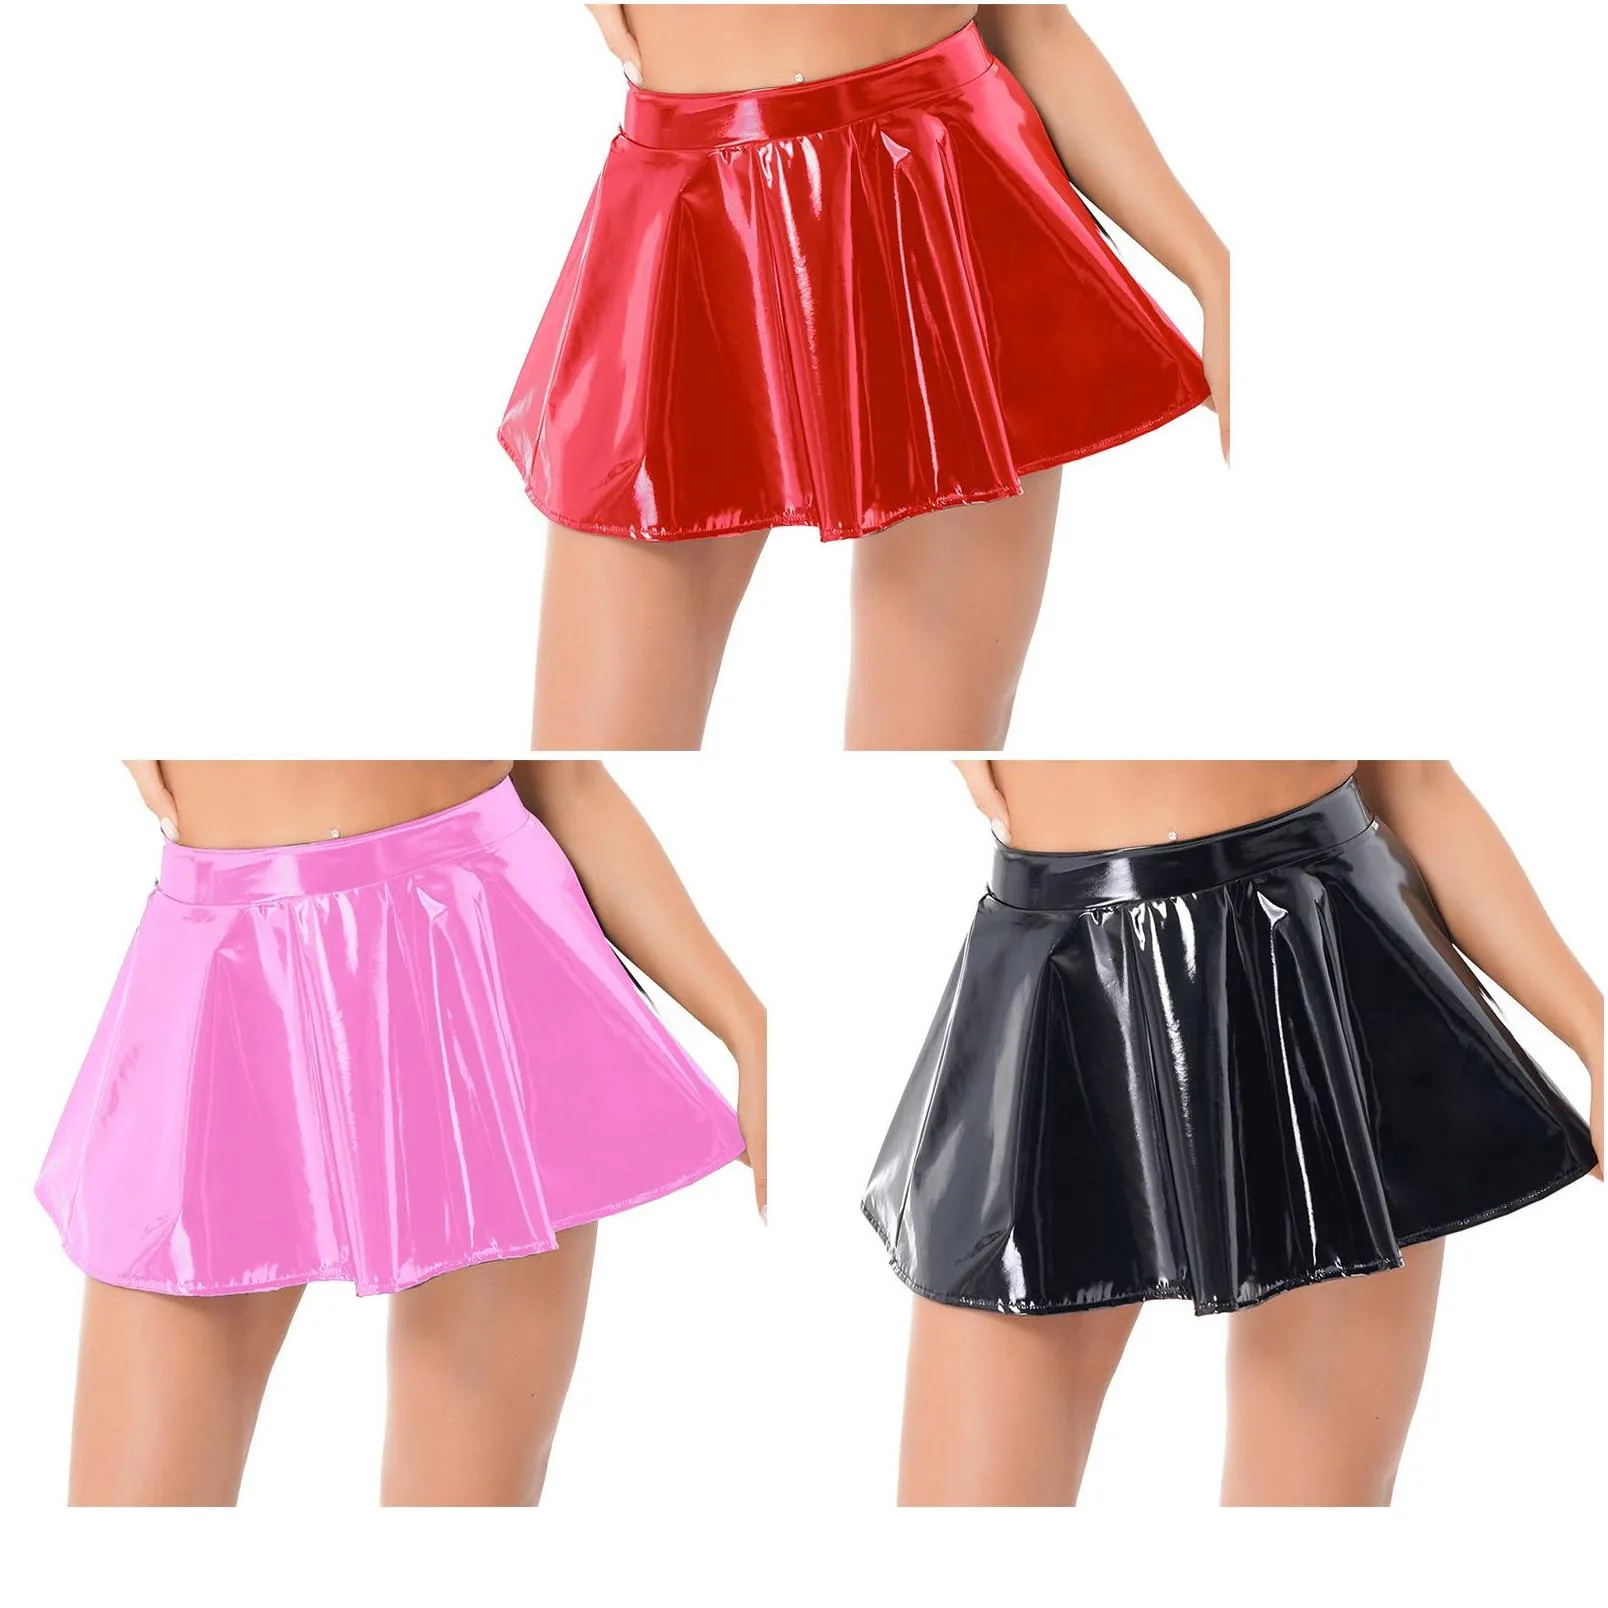 Skirts Womens Latex Skirt For Rave Party Club Dance Stage Performance Costume Clubwear Woman Wetlook Patent Leather Flared Mini Drop Dh78S